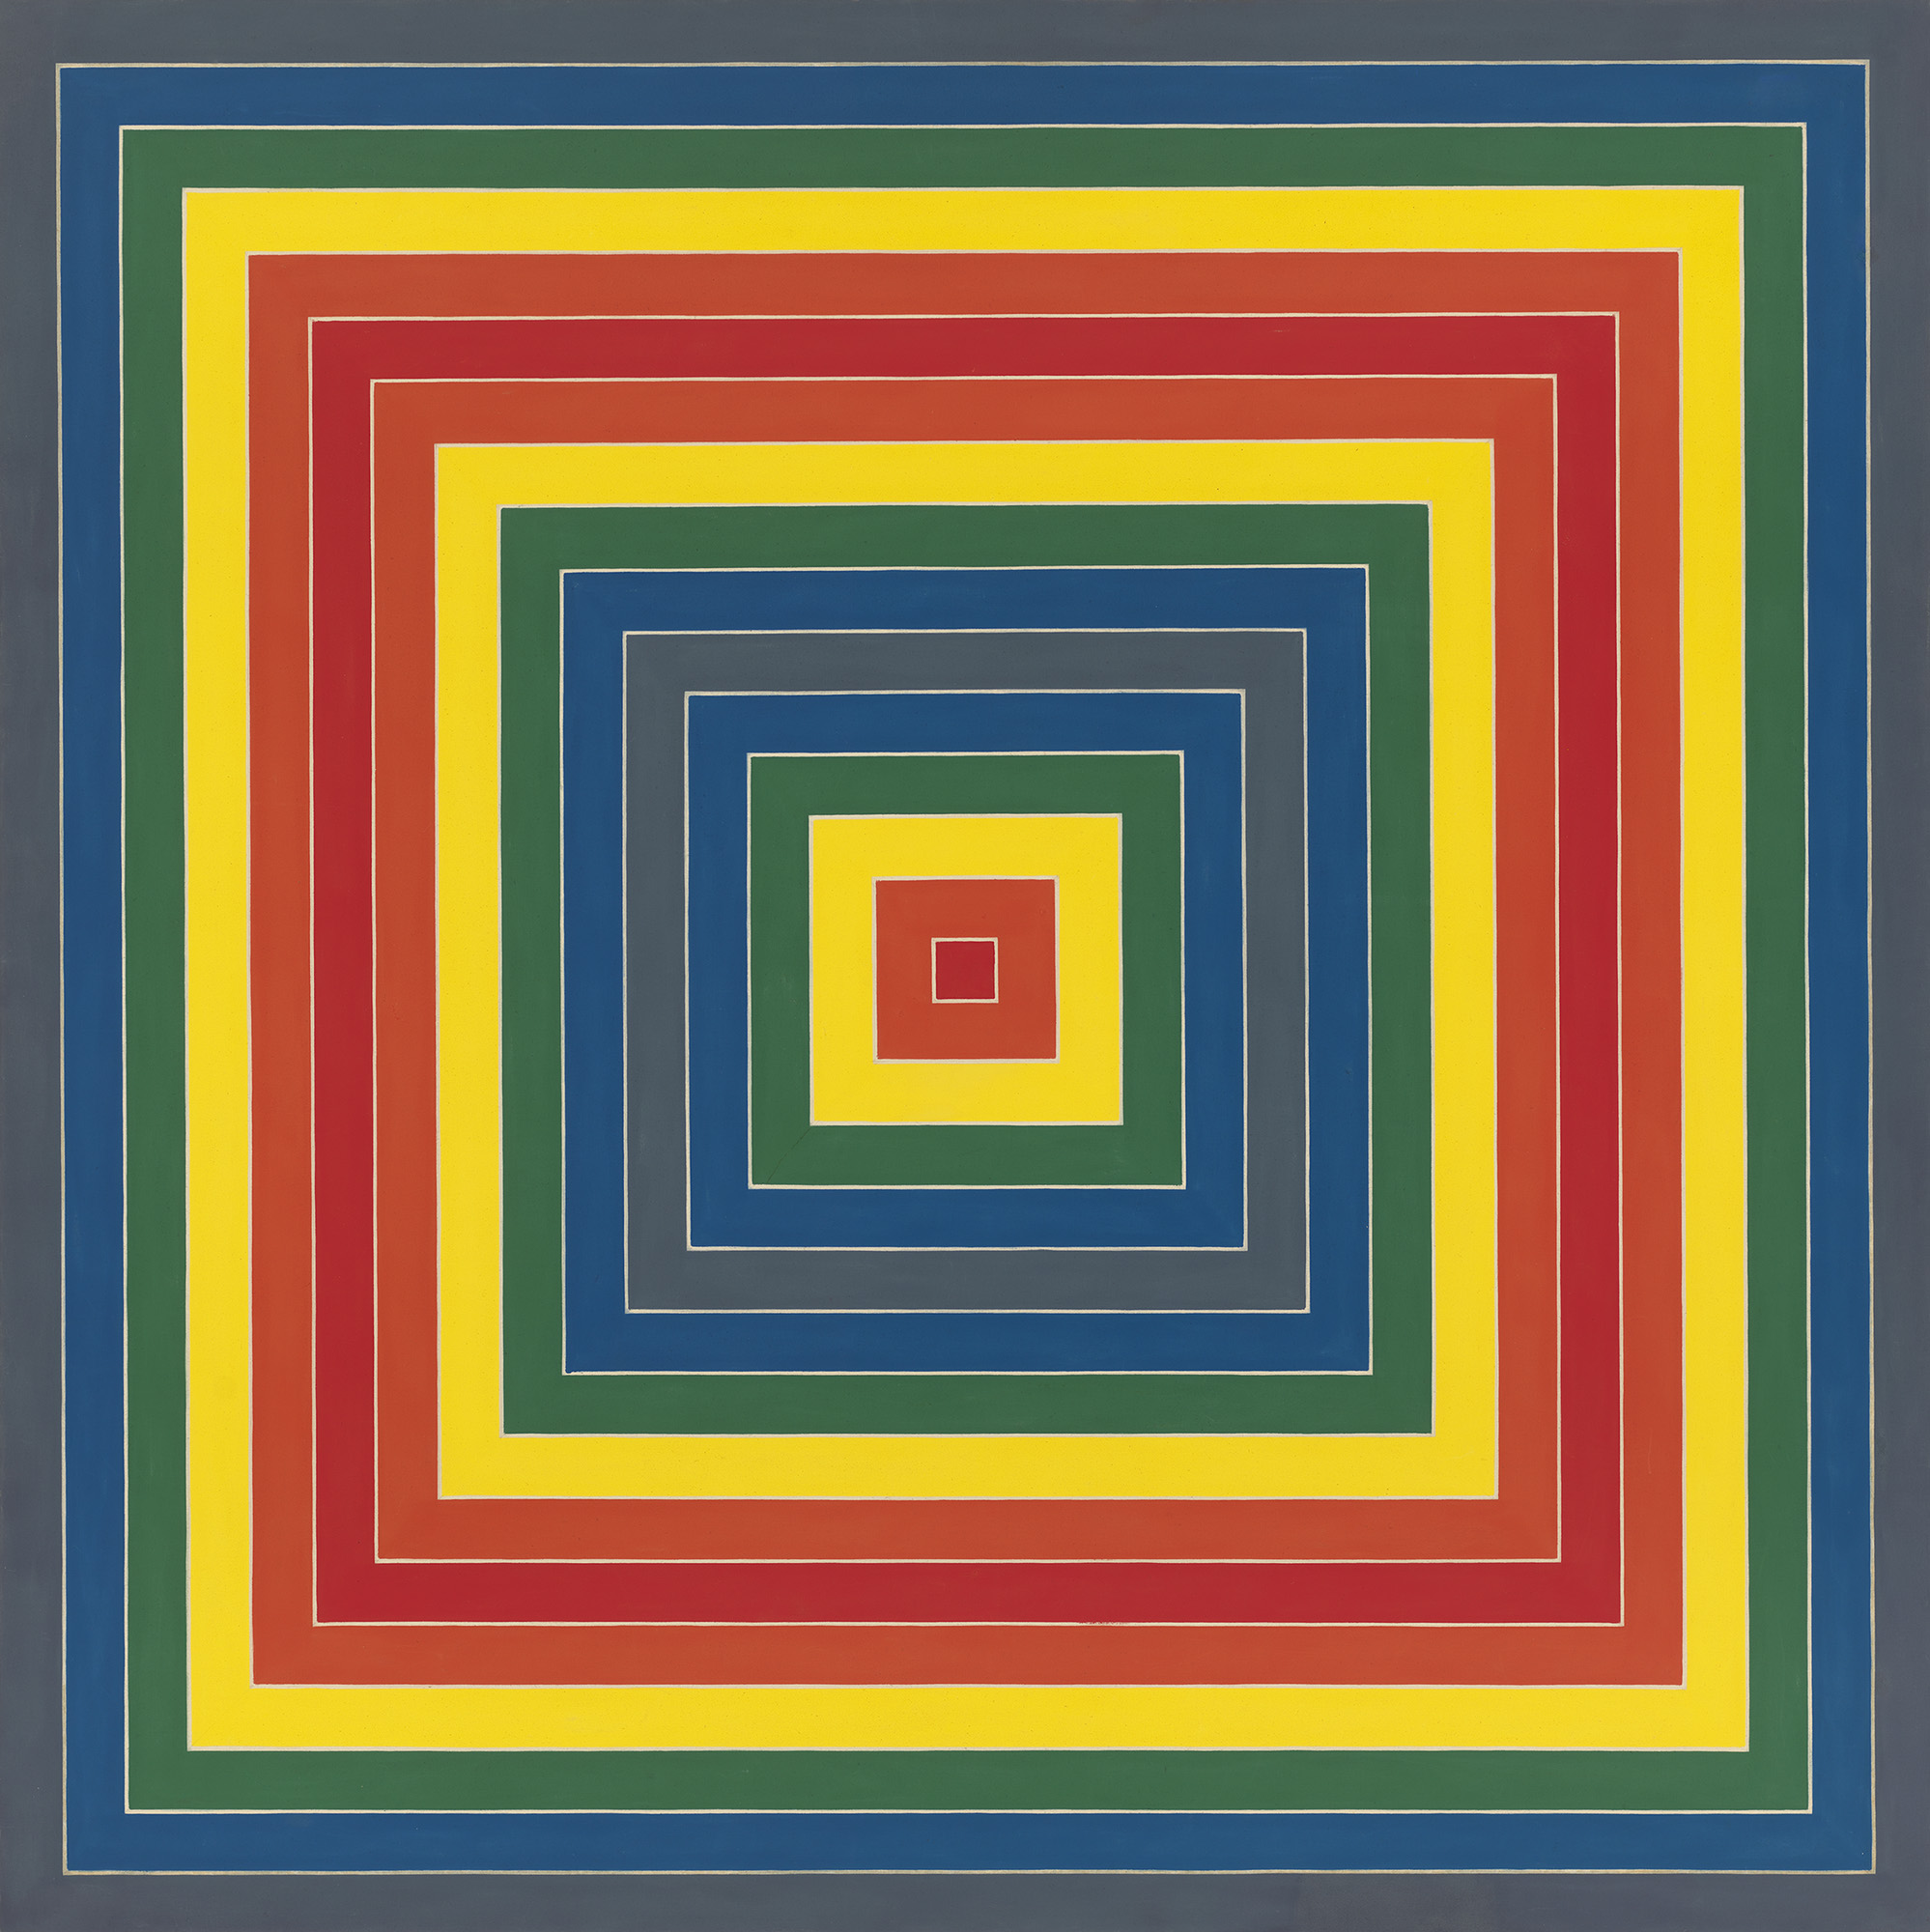  Frank Stella,  Gran Cairo , 1962. Alkyd on canvas, 85 9/16 × 85 9/16 in. (217.3 × 217.3 cm). Whitney Museum of American Art, New York; purchase with funds from the Friends of the Whitney Museum of American Art 63.34. © 2019 Frank Stella/Artists Righ